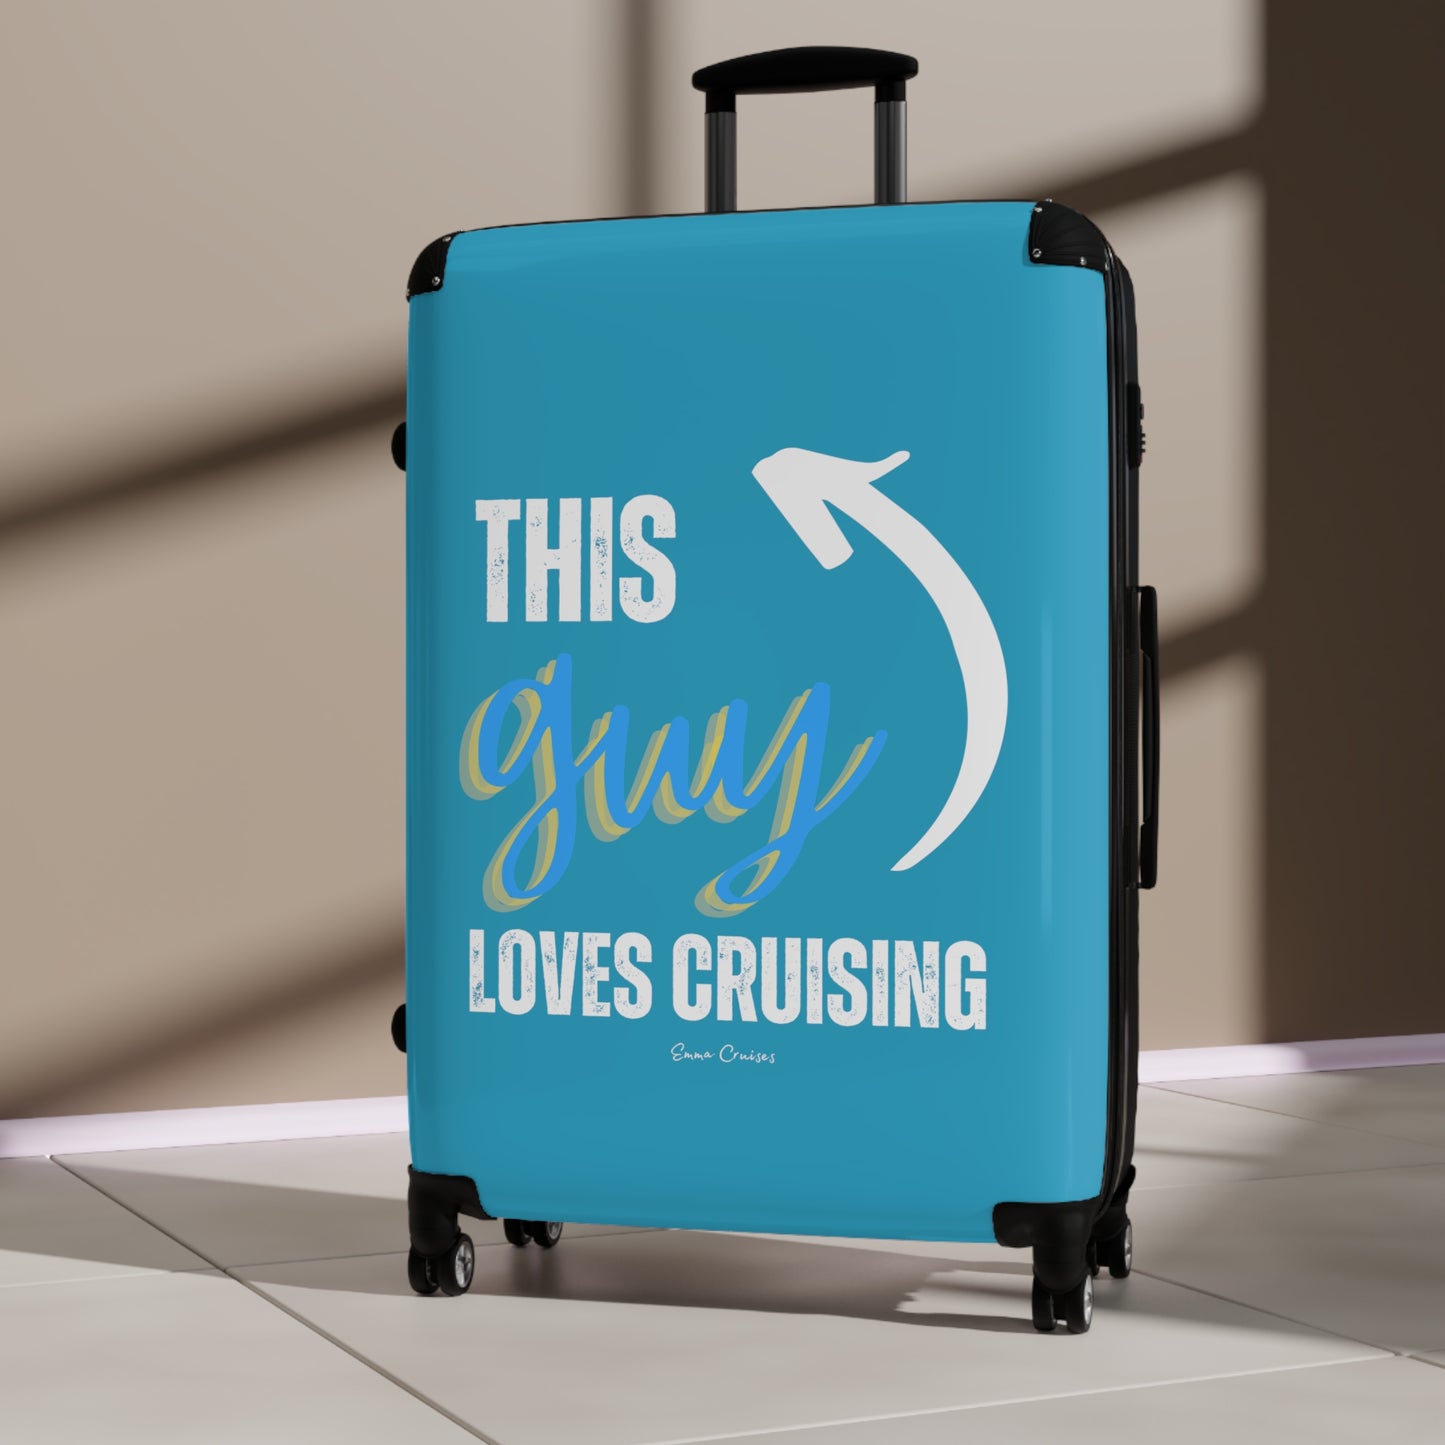 This Guy Loves Cruising - Suitcase